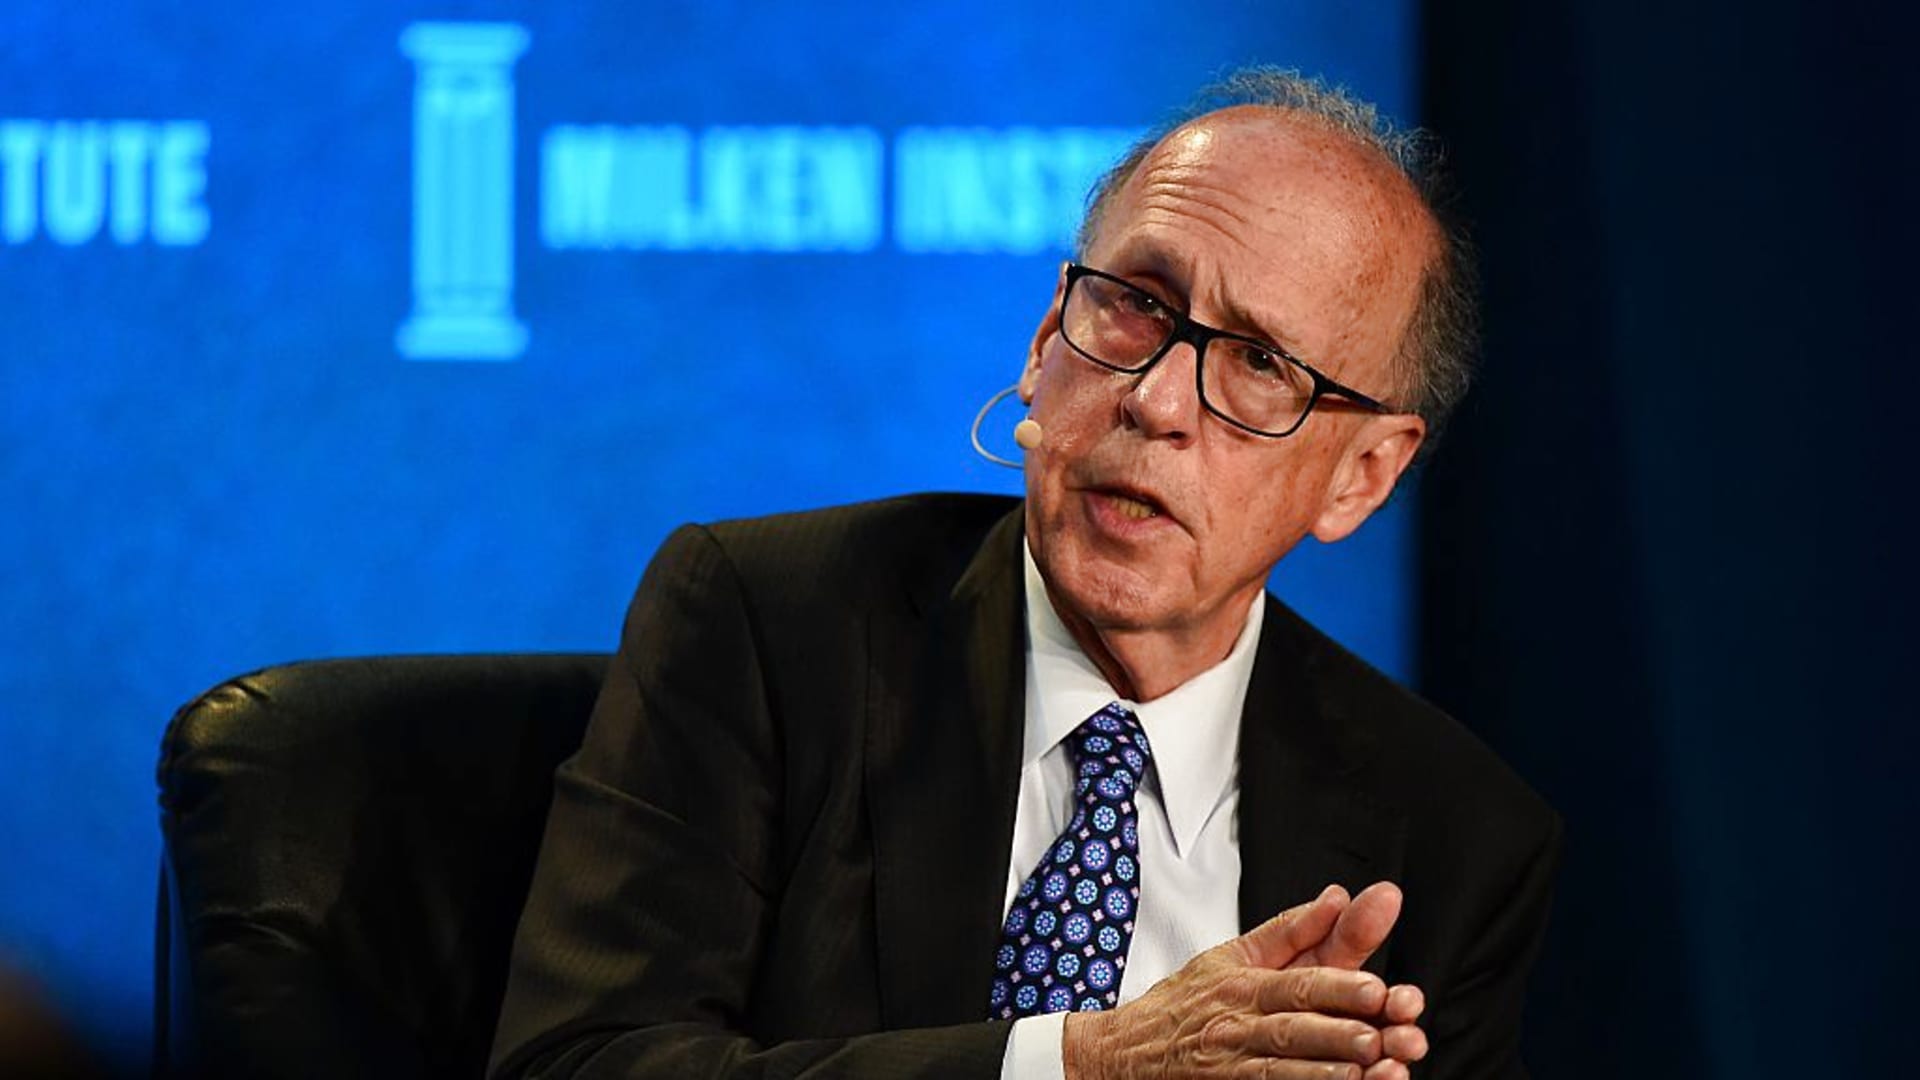 Worst is yet to come: Economist Stephen Roach says U.S. needs ‘miracle’ to avoid recession